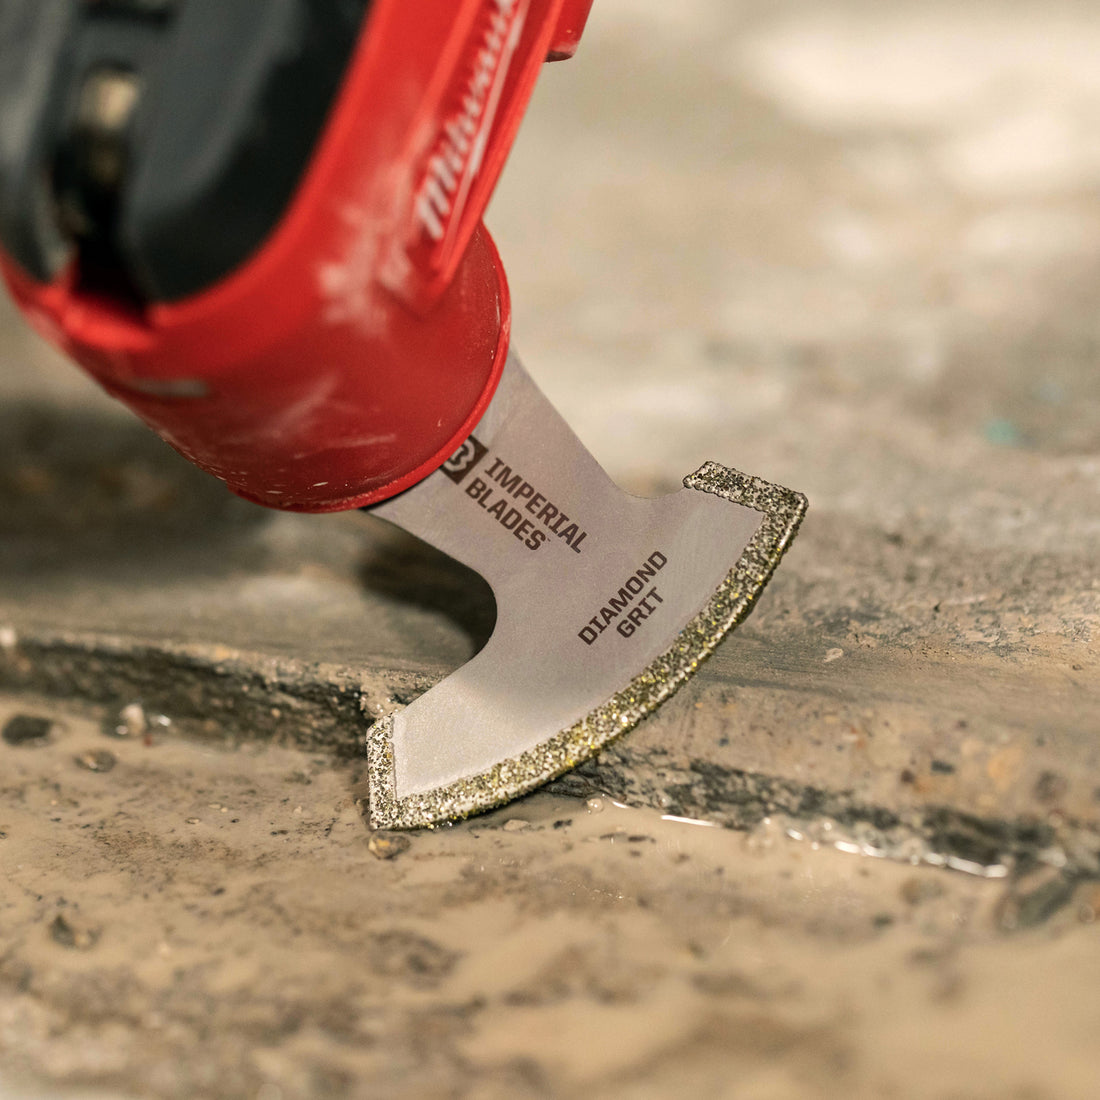 Top 3 Oscillating Multi Tool Blades for Concrete Cutting